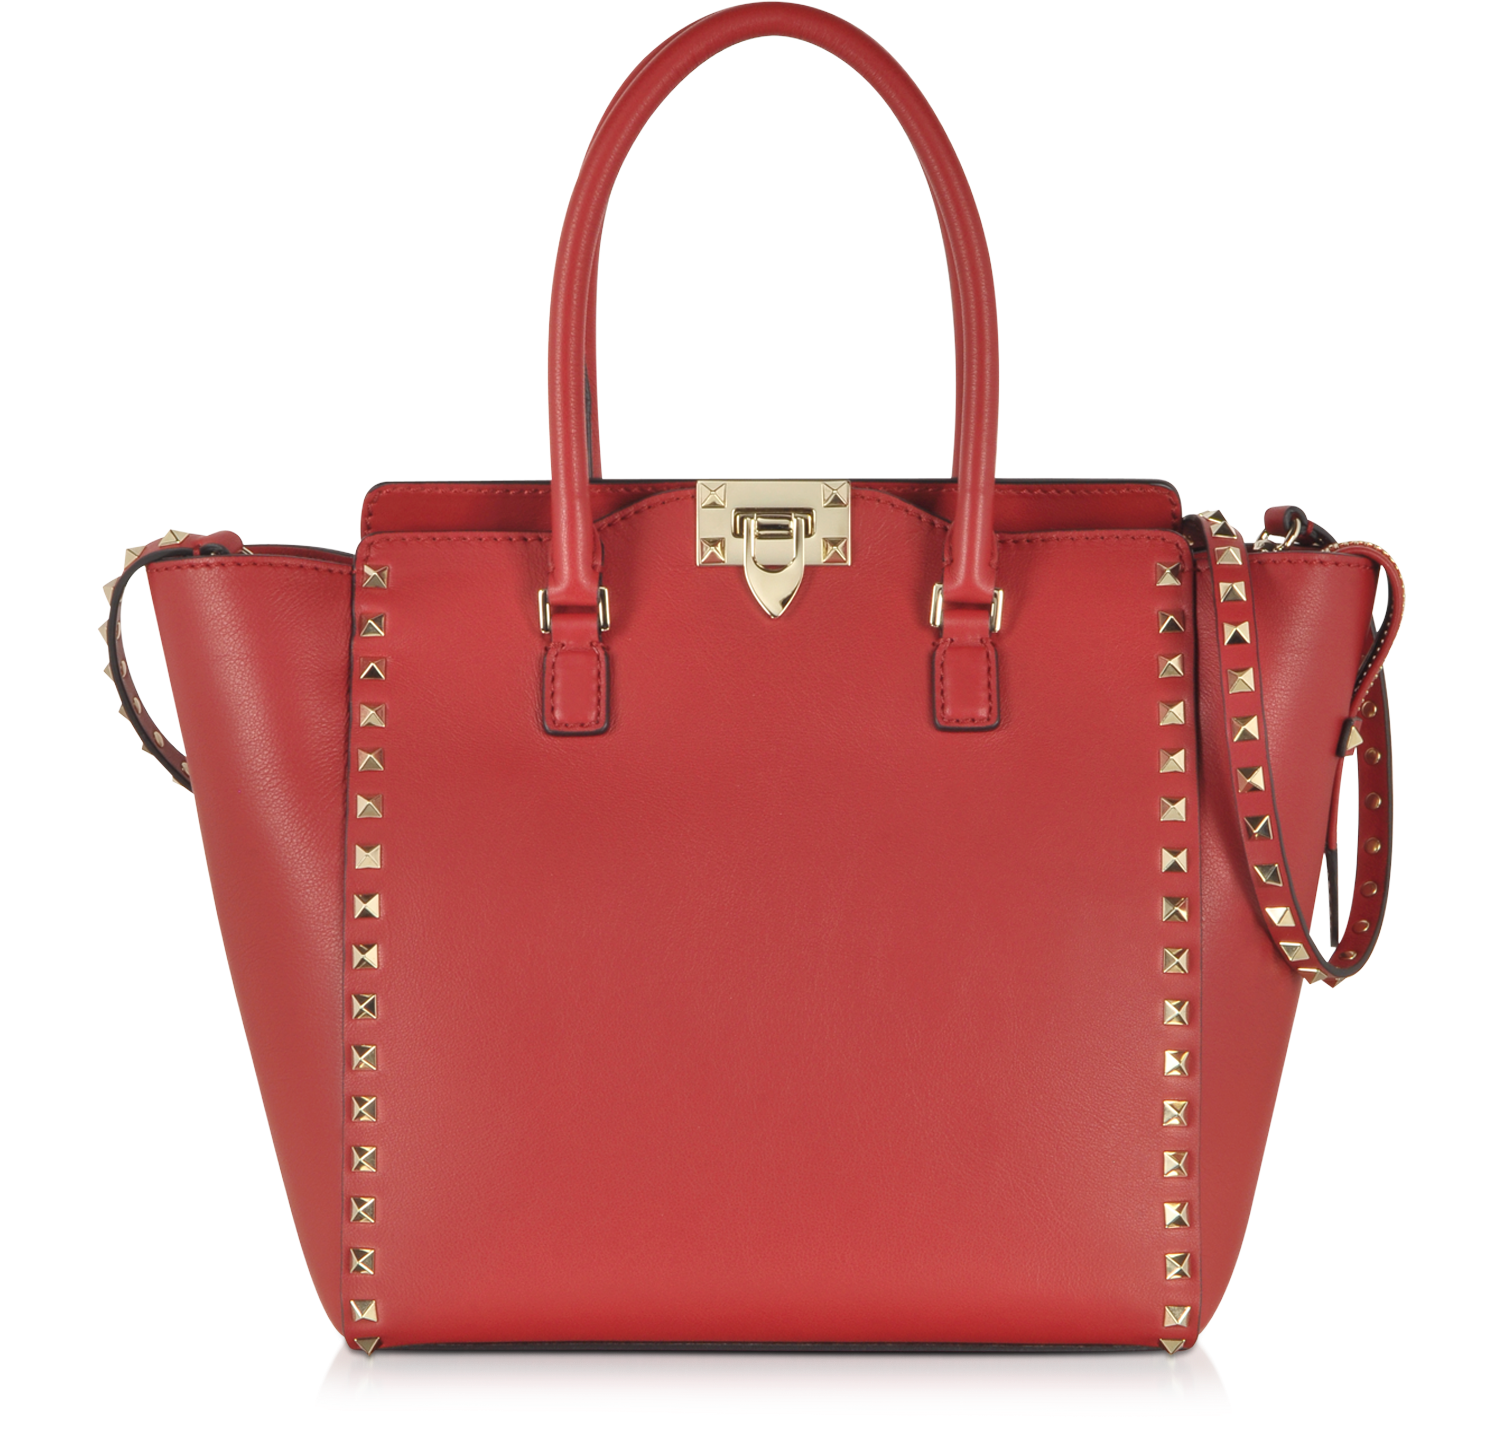 Valentino Red Rockstud Leather Tote at FORZIERI